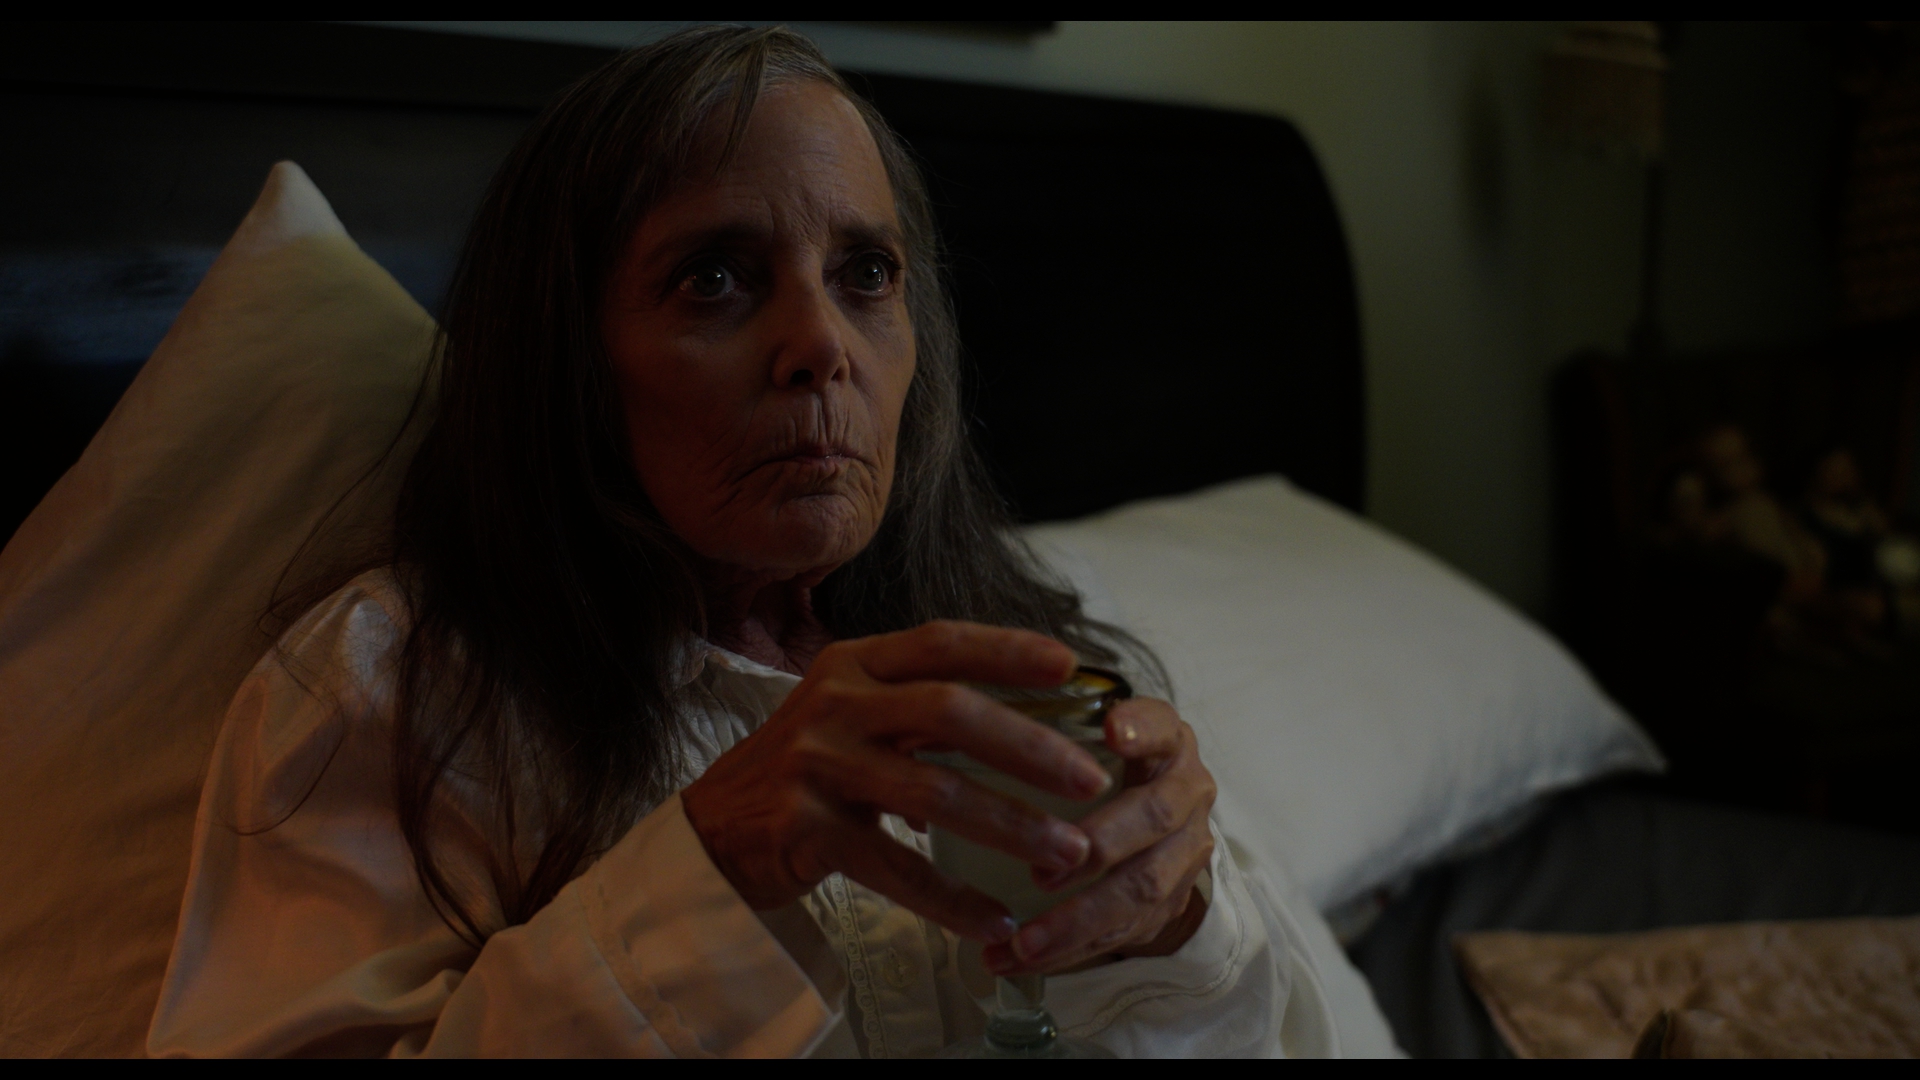 Horror film NIGHT OF THE CAREGIVER will be released in the US and